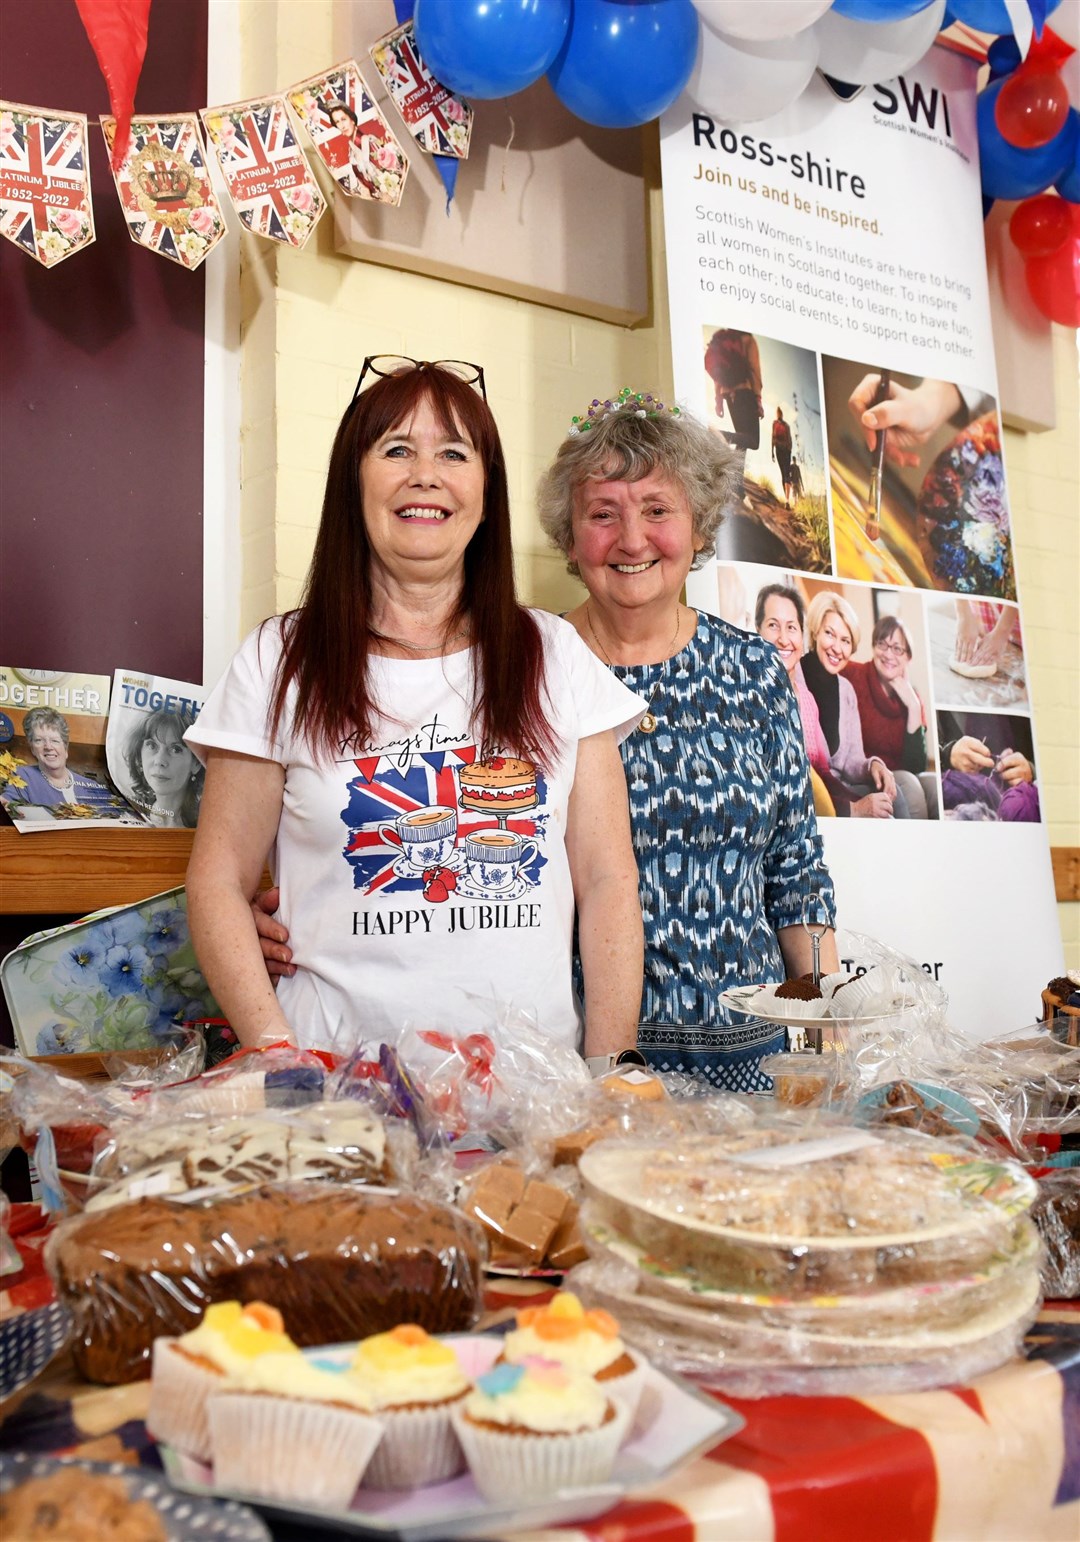 Queen's Jubilee Celebrations at North Kessock: Mo Bates and Miriam Morley, Scottish Women's Institutes.Picture: James Mackenzie.